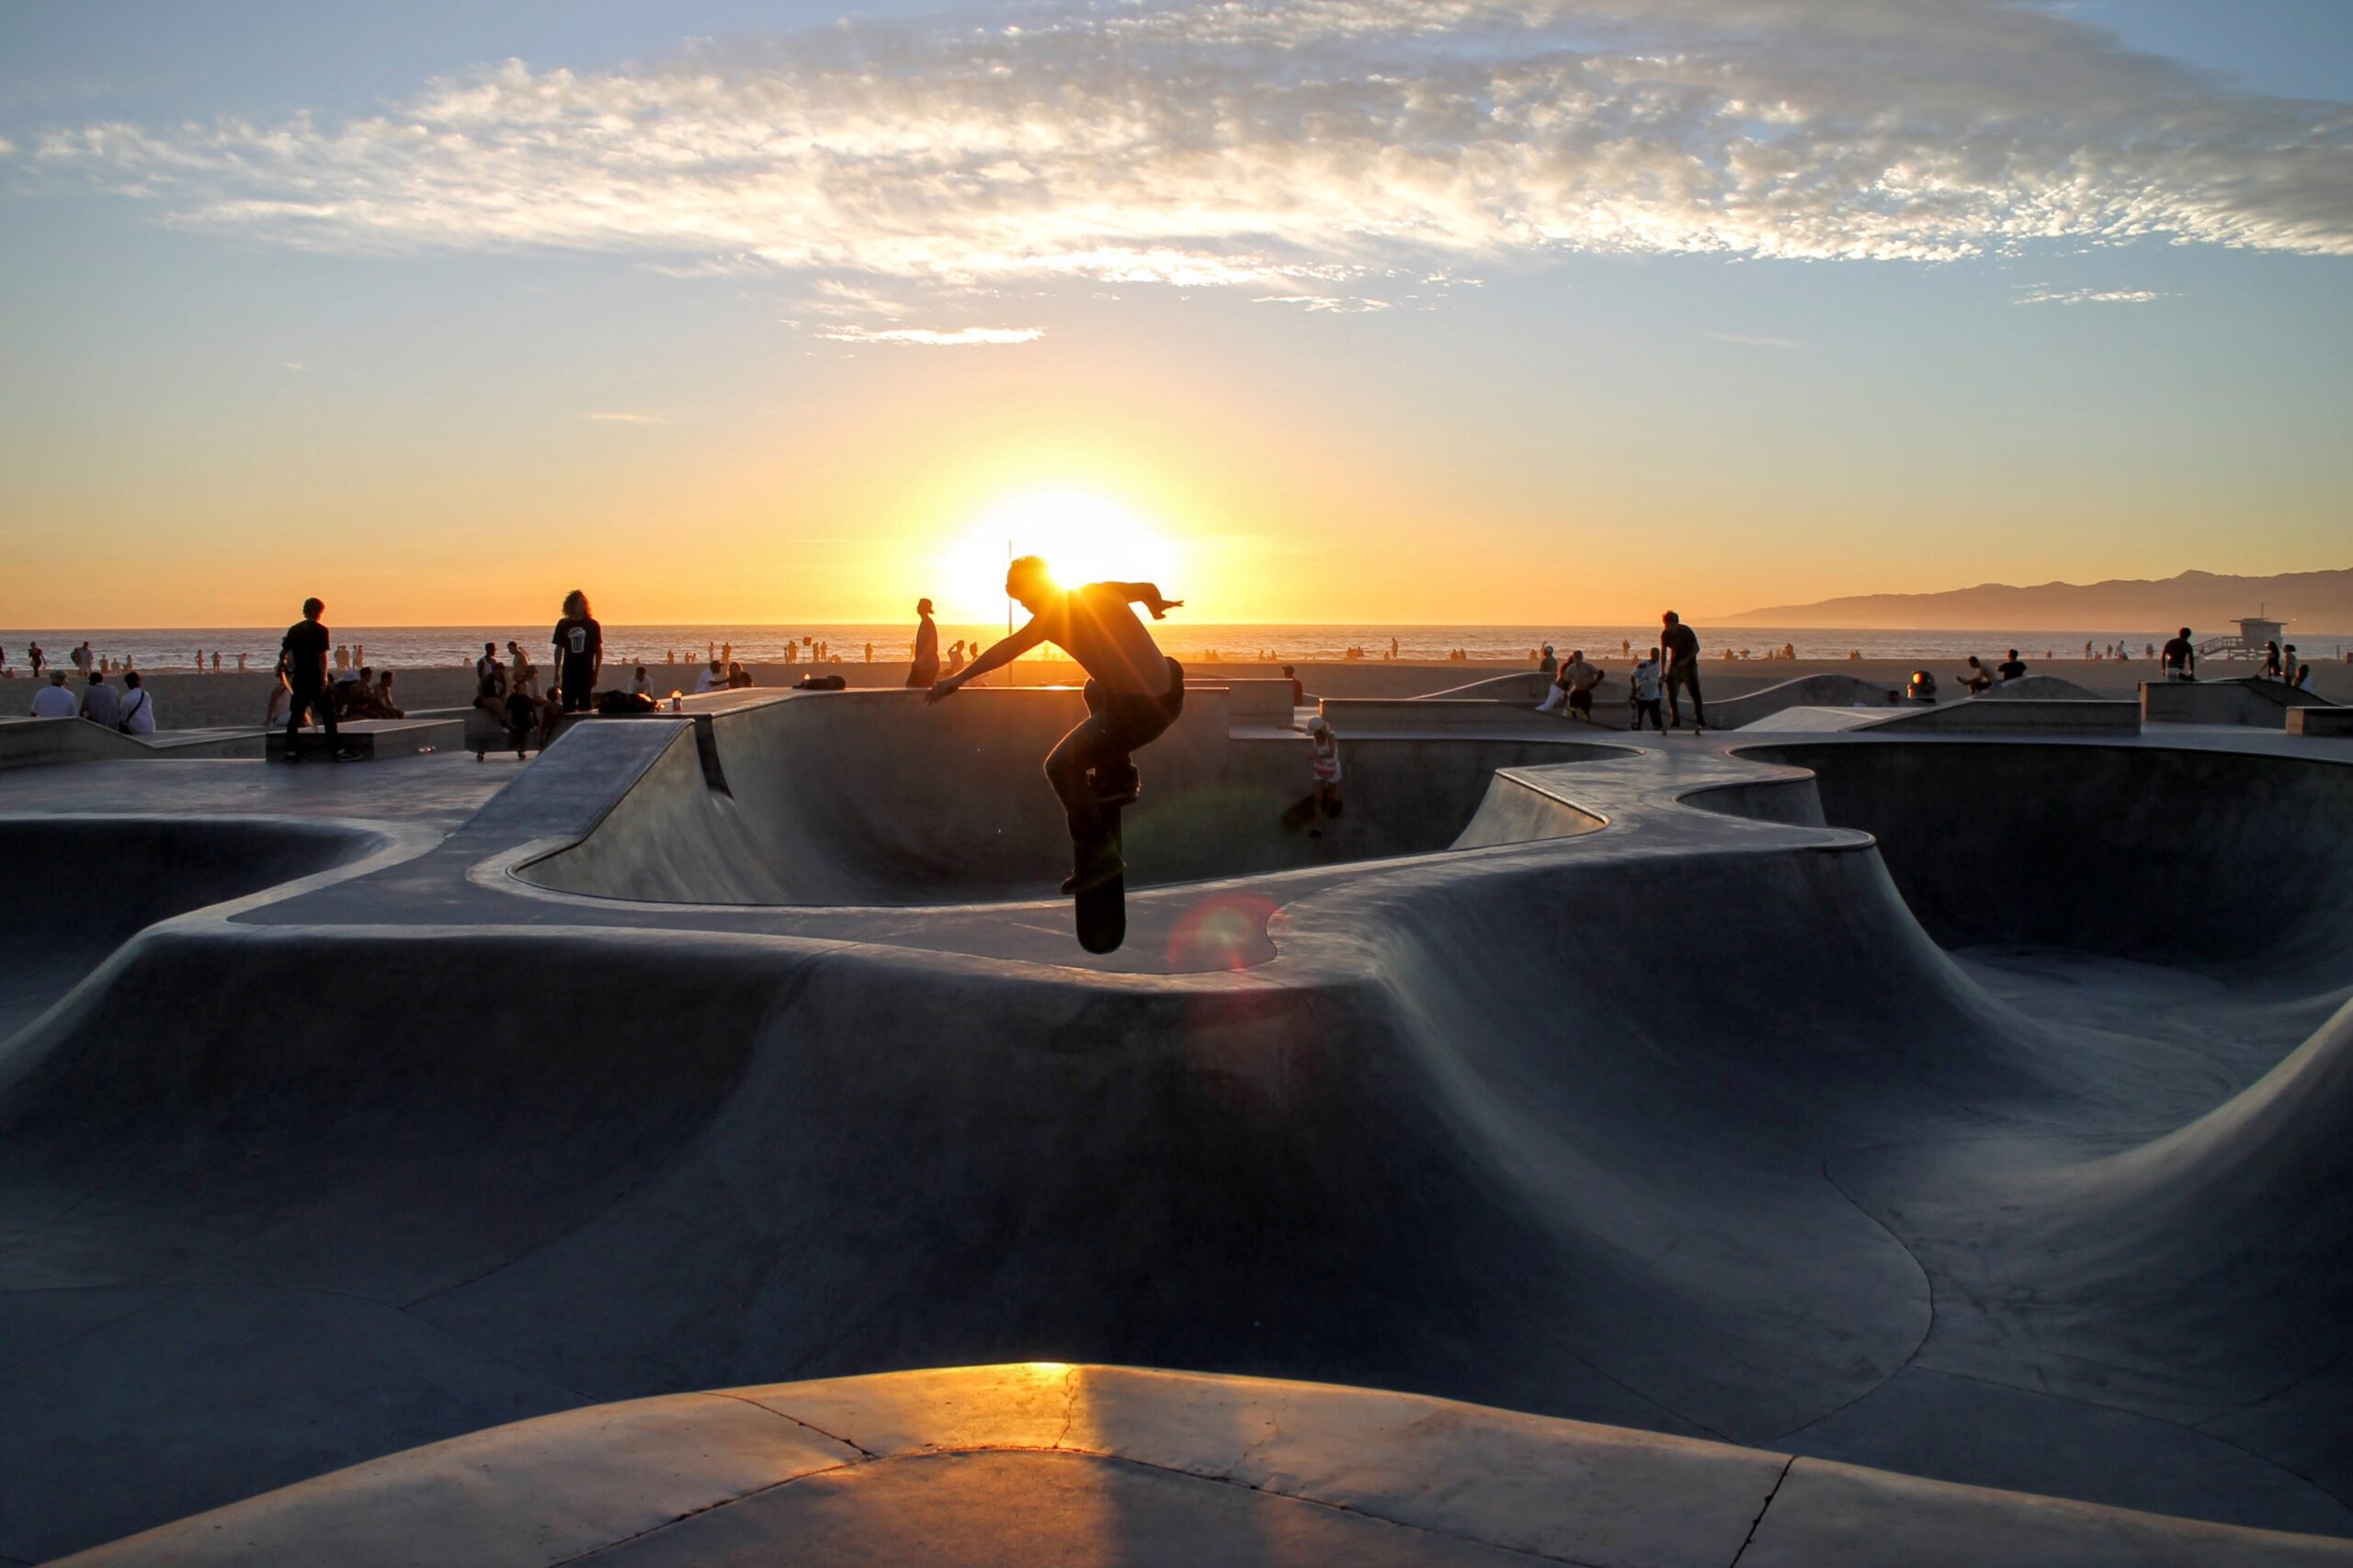 Can You Provide Insights On Enhancing Skateboard Flow And Fluidity In Your Runs?